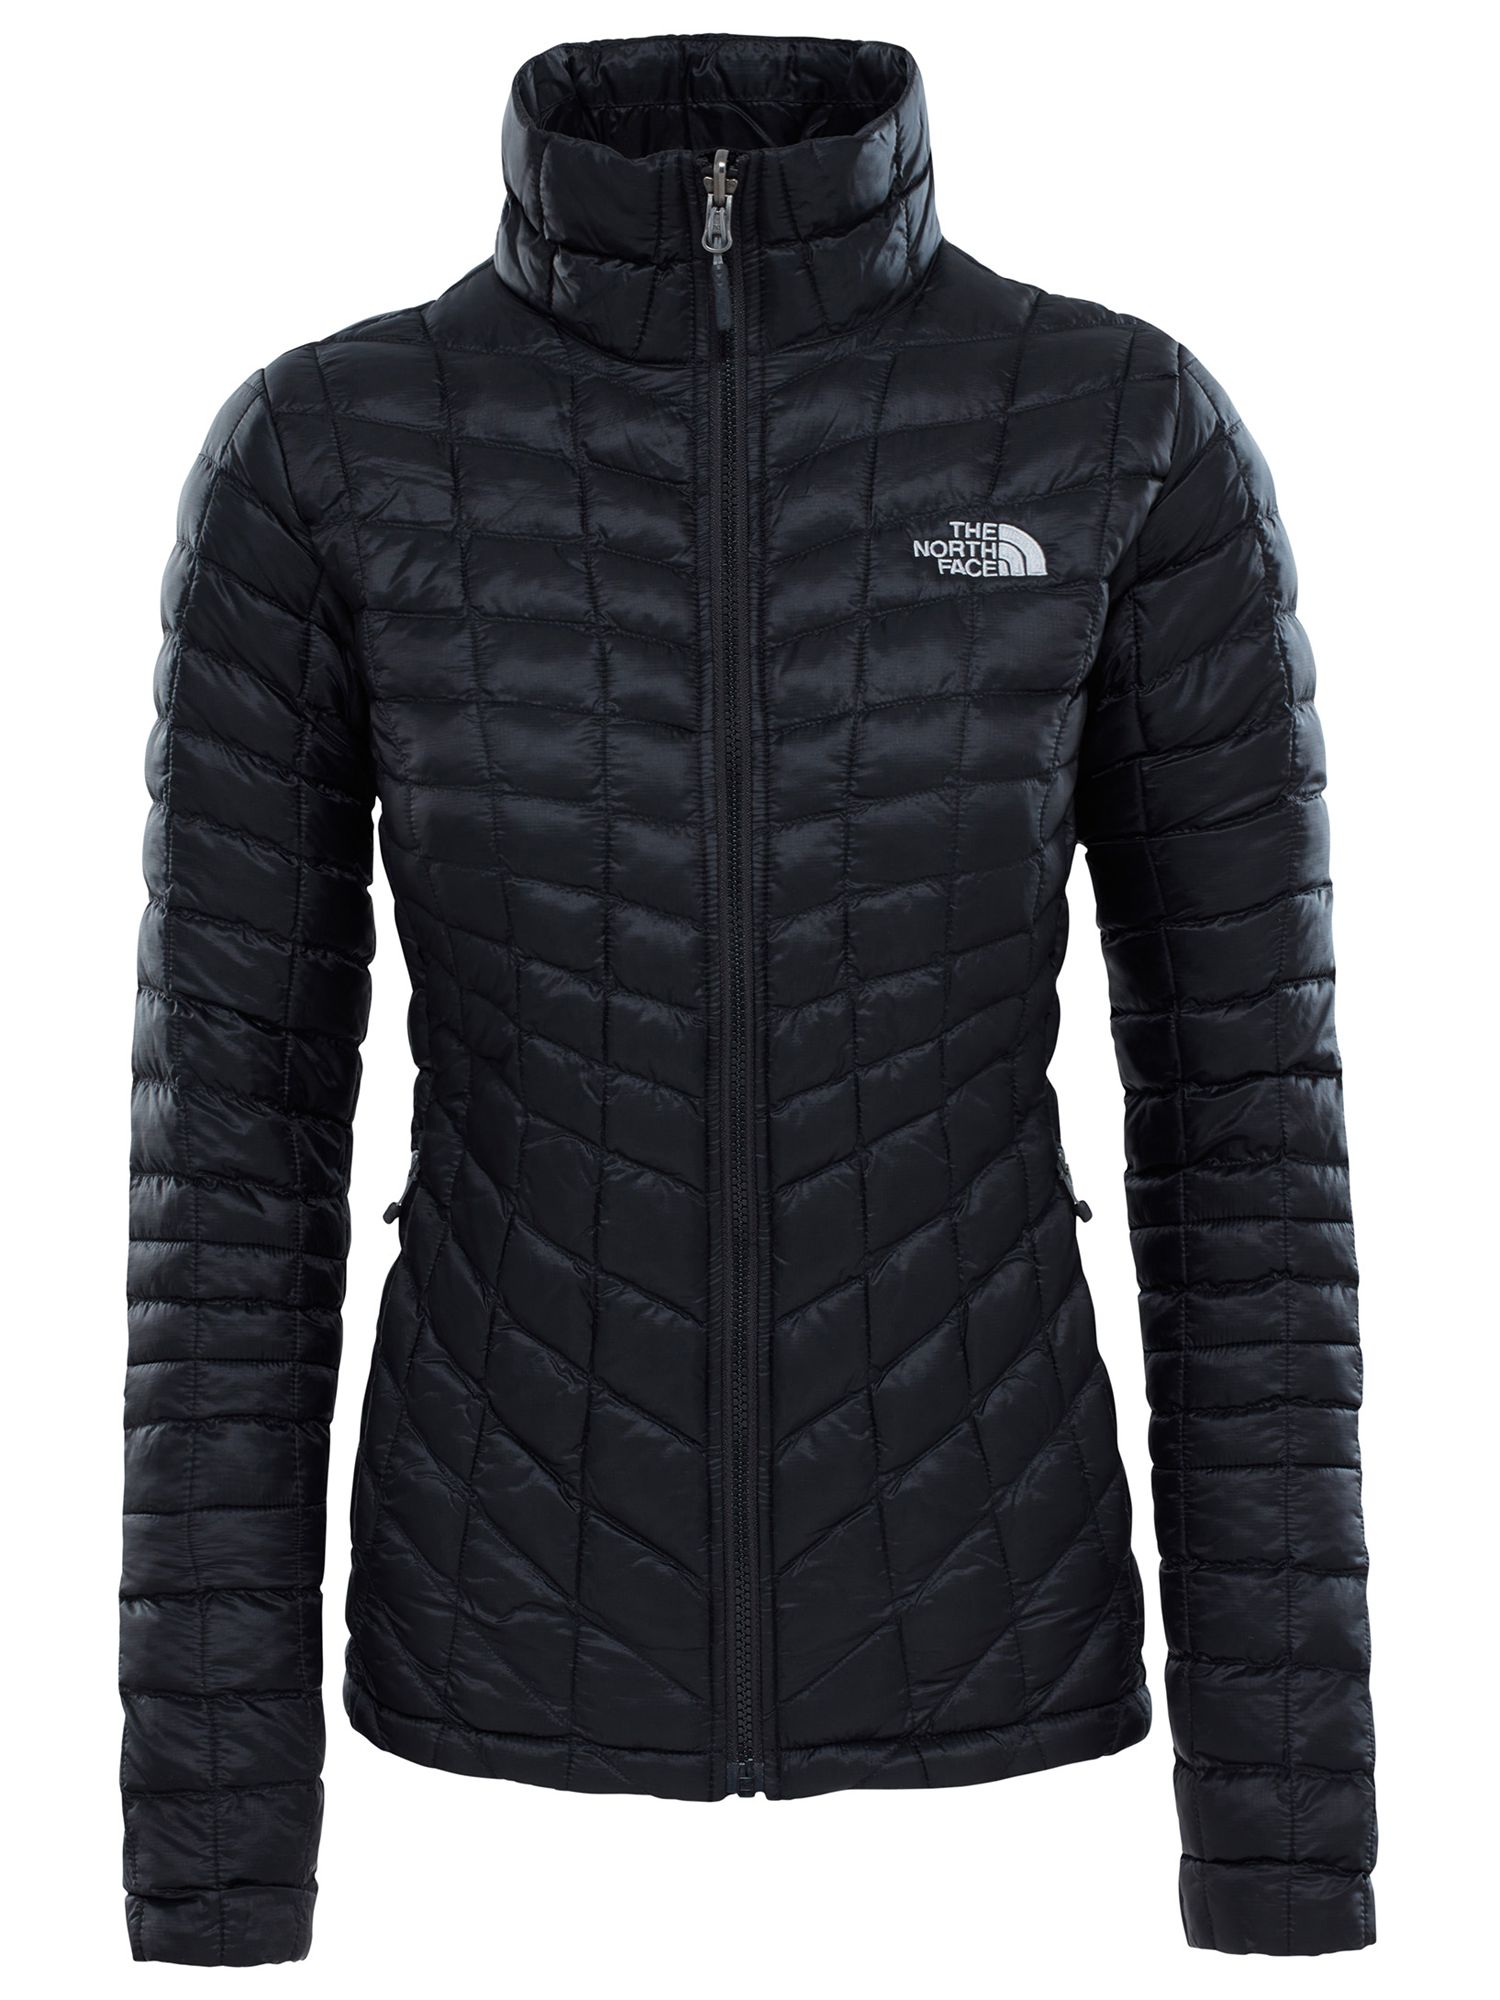 womens black thermoball jacket